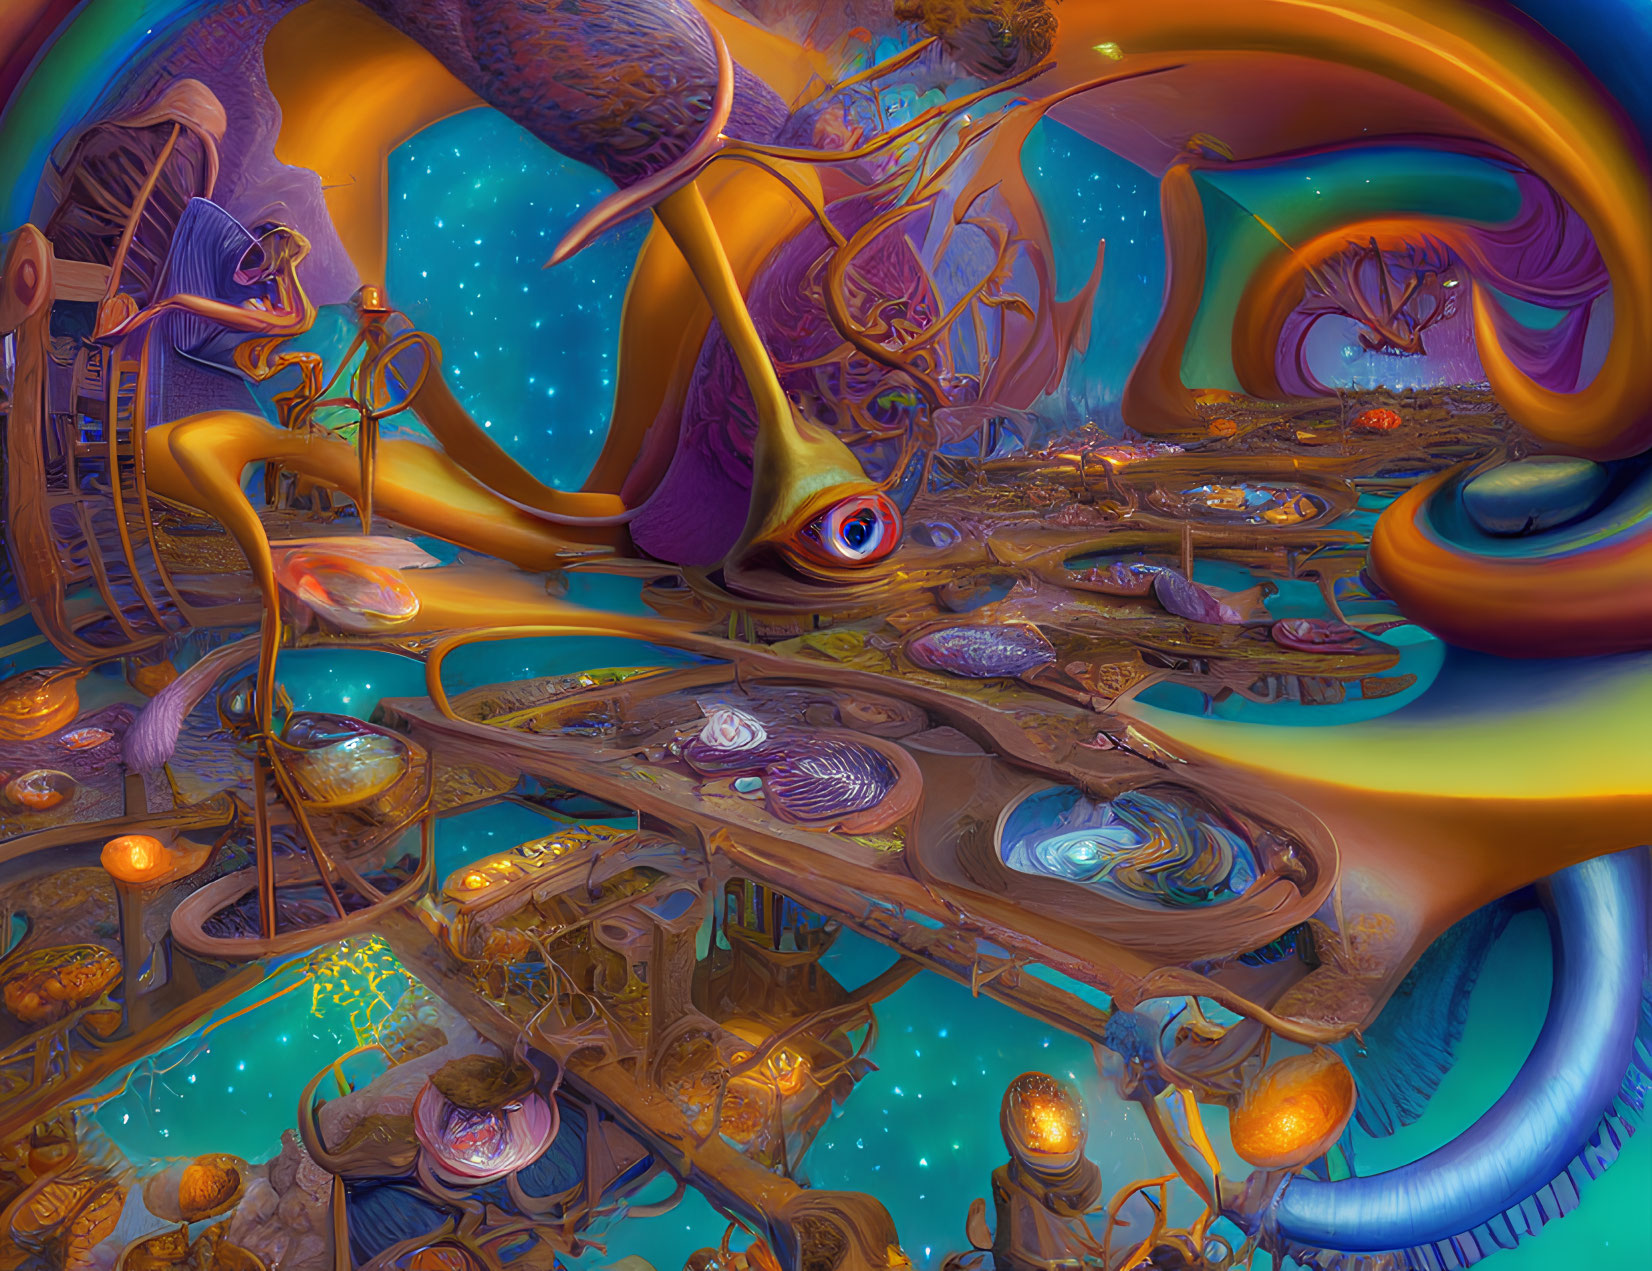 Colorful fantasy landscape with swirling orange and blue hues and luminous orbs.